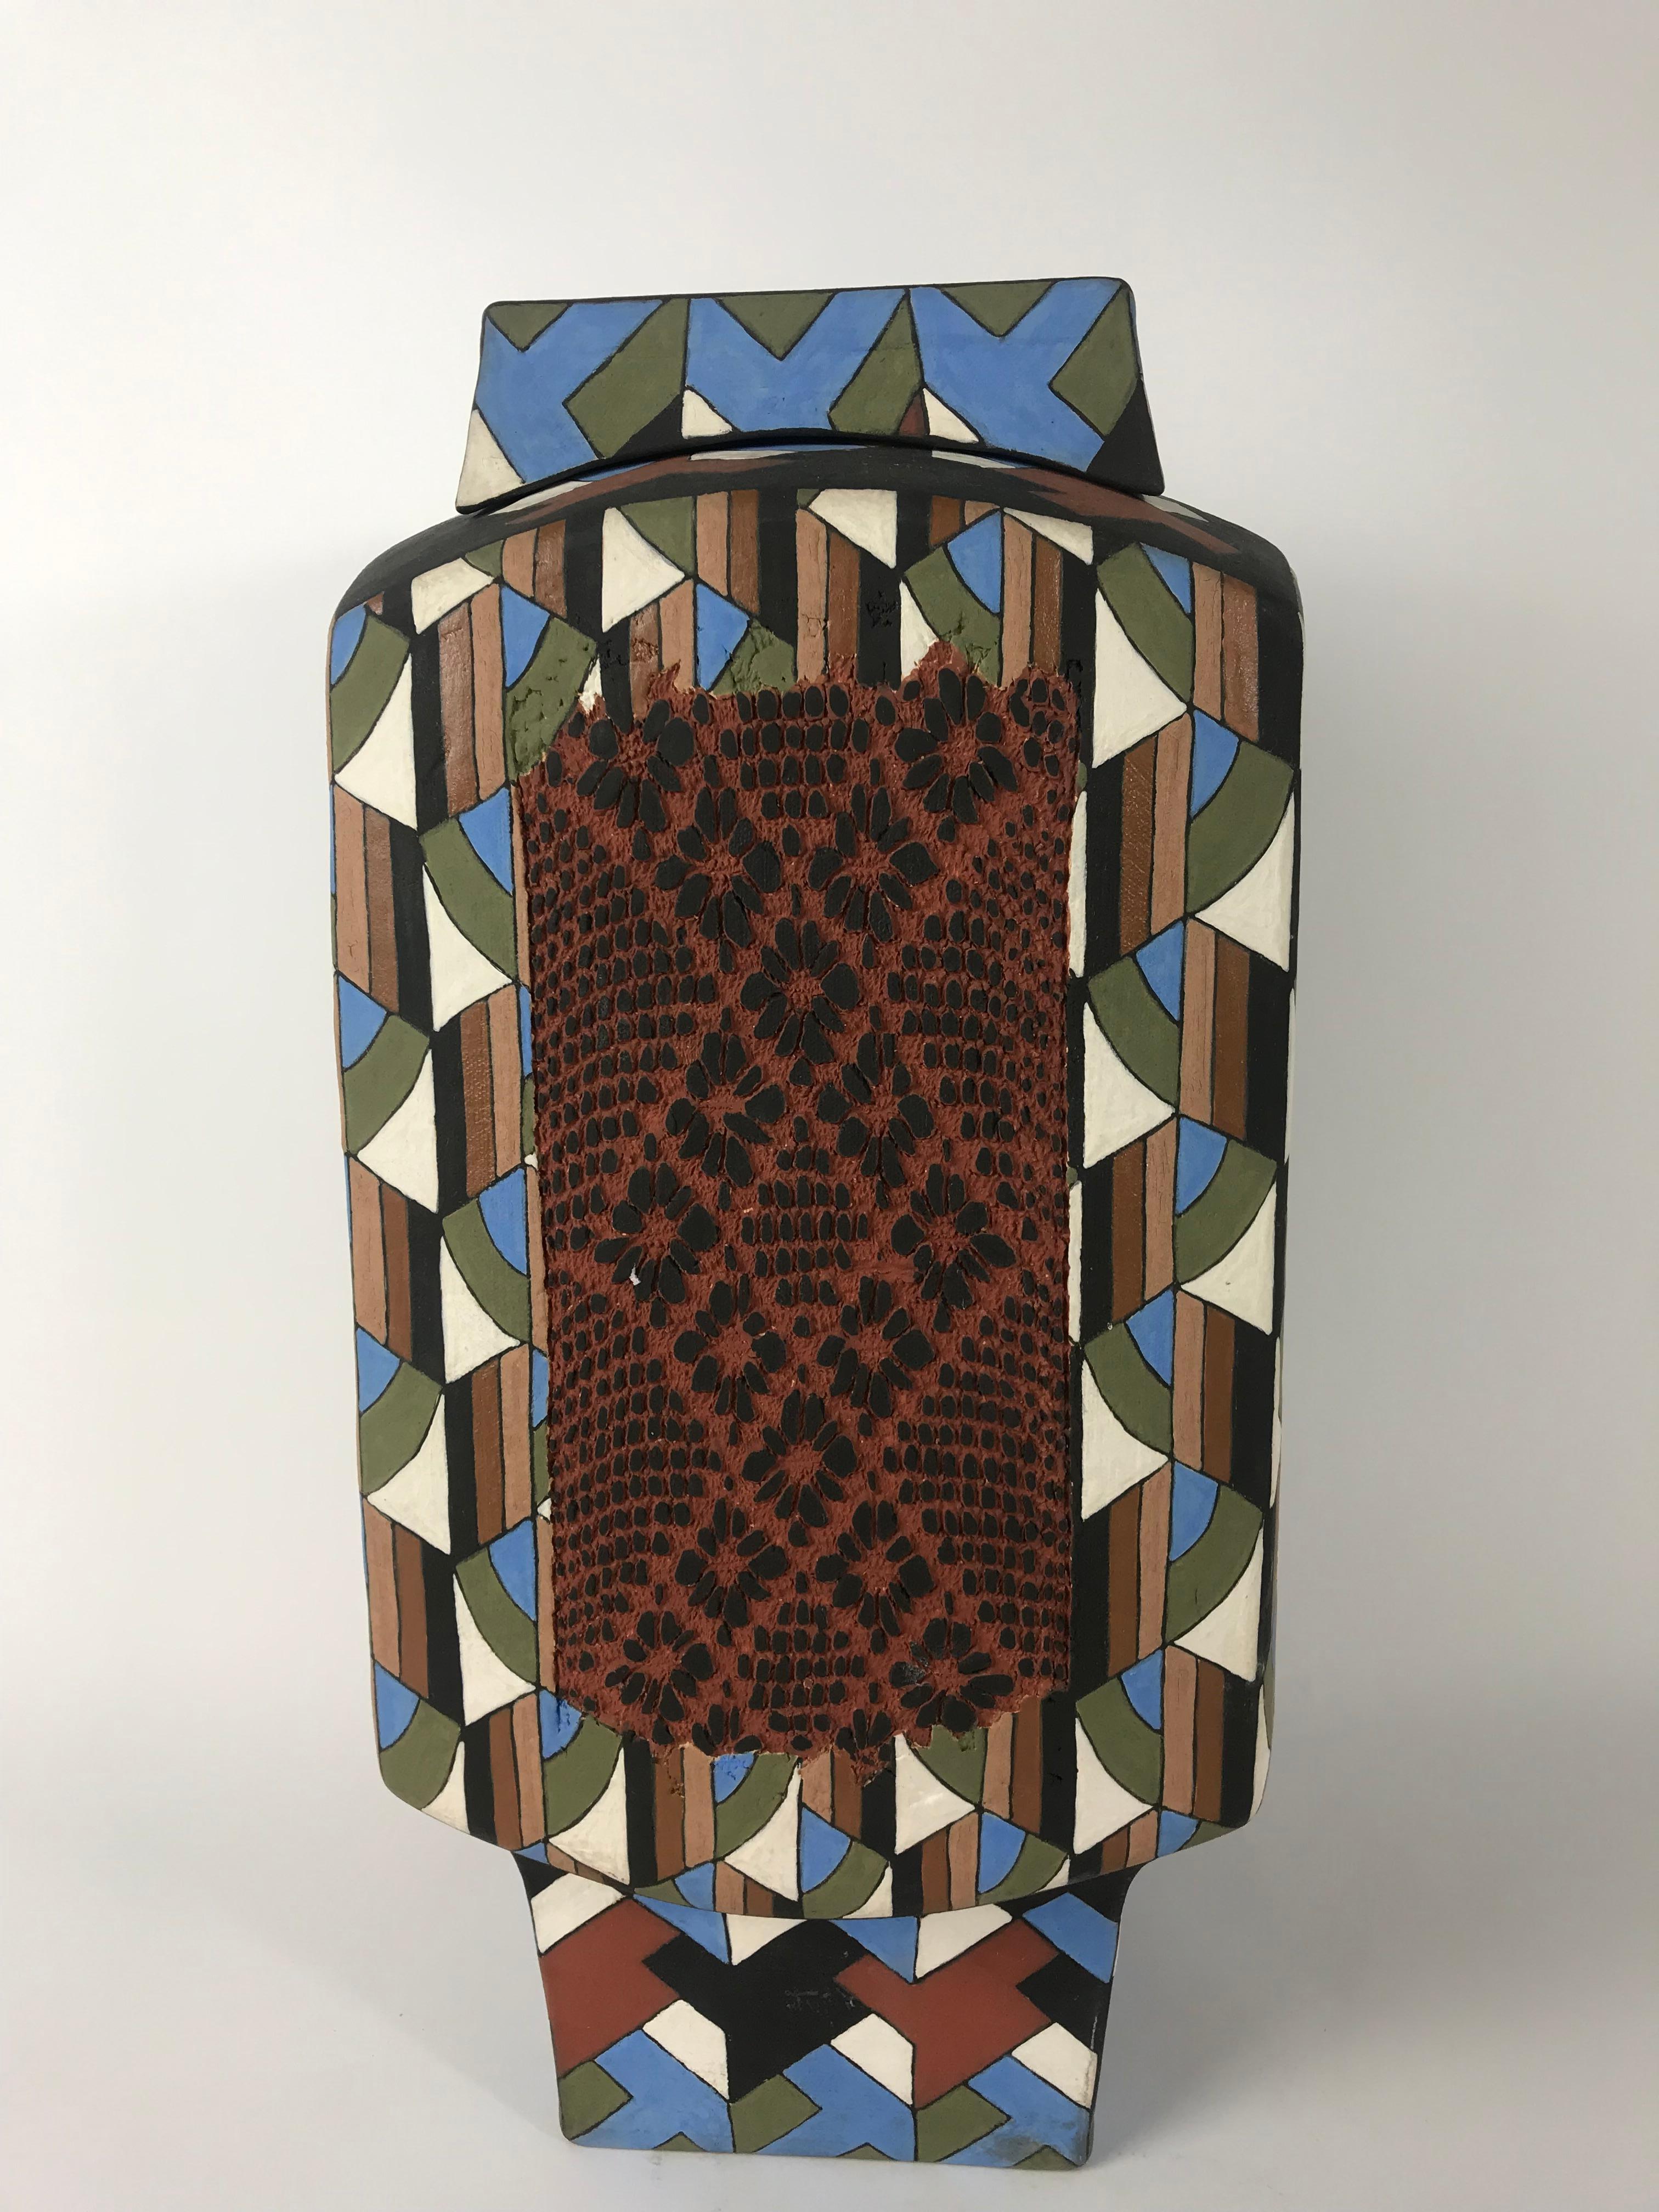 A mind bending abstract covered ceramic vase by Phillip and Marilyn Garnick. This vase features a unique cubic design blended by abstract geometric patterns in a sharp and sleek finish of fair tones of blue, green, black and brown. The final touch